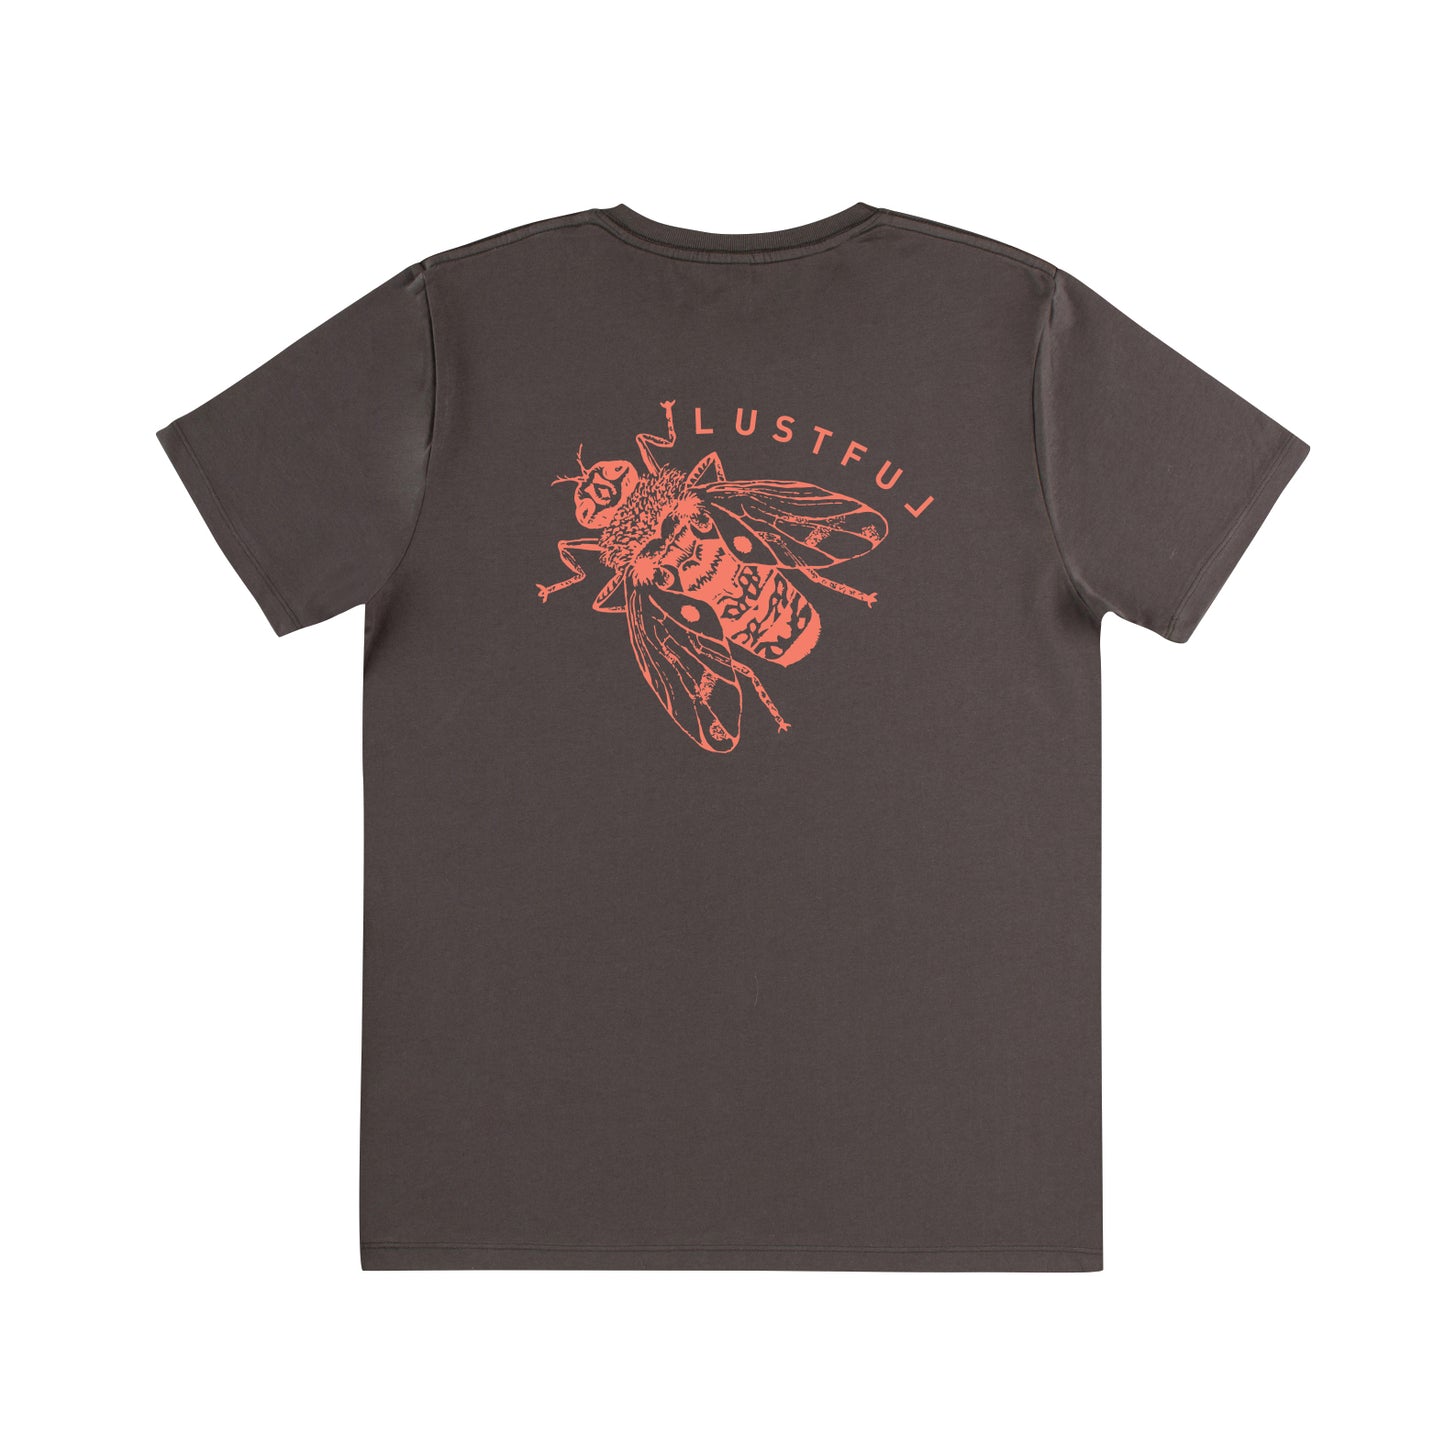 Bug t-shirt in charcoal